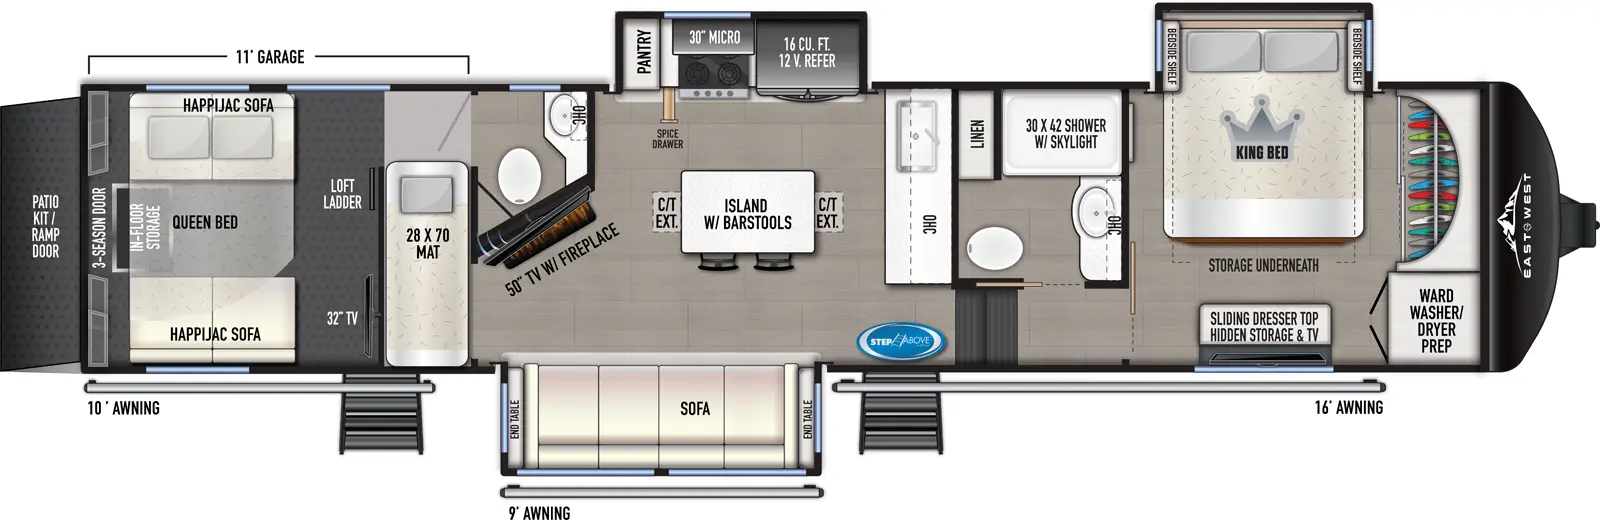 The 350TH has three slideouts, two entries, and a rear ramp door. Interior layout front to back: front wardrobe with washer/dryer prep, off-door side king bed slideout with bedside shelves on each side and storage underneath, and door side dresser with TV prep; off-door side full bathroom with linen closet, overhead cabinet above the sink, and shower with skylight; steps down to main living area and entry; kitchen counter with sink and overhead cabinet along inner wall; off-door side slideout with 12V refrigerator, microwave, cooktop, spice drawer, and pantry; kitchen island with seating; door side sofa slideout with end tables on each side; angled TV with fireplace along inner wall; rear garage with second entry, half bath with overhead cabinet above the sink, loft with mat above with ladder access, and rear opposing happijack sofas with queen bed above, in-floor storage, and a 3-season door that leads to patio kit on rear ramp door.